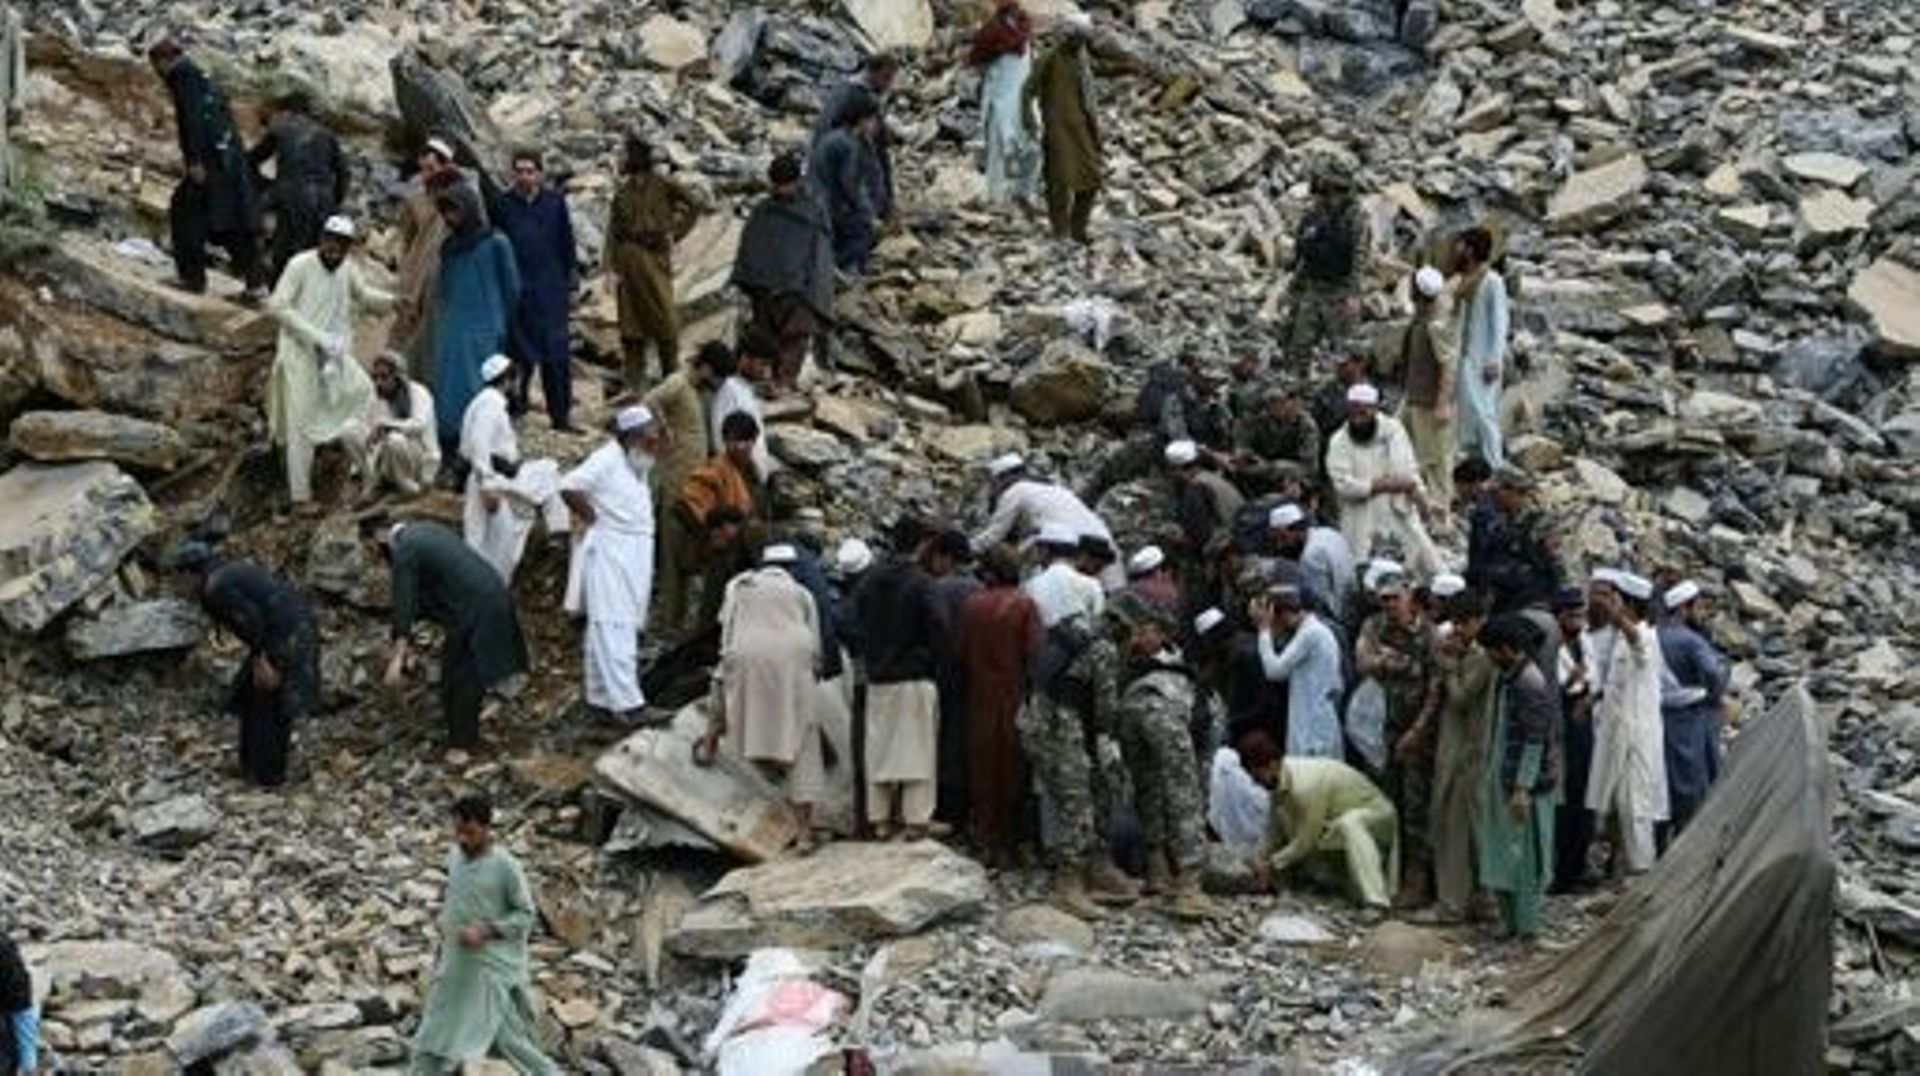 Security officials and onlookers gather near wrecked trucks following a landside near Pakistan’s Torkham border town on April 18, 2023. At least two people were killed and eight injured in a massive pre-dawn landslide that buried dozens of trucks waiting